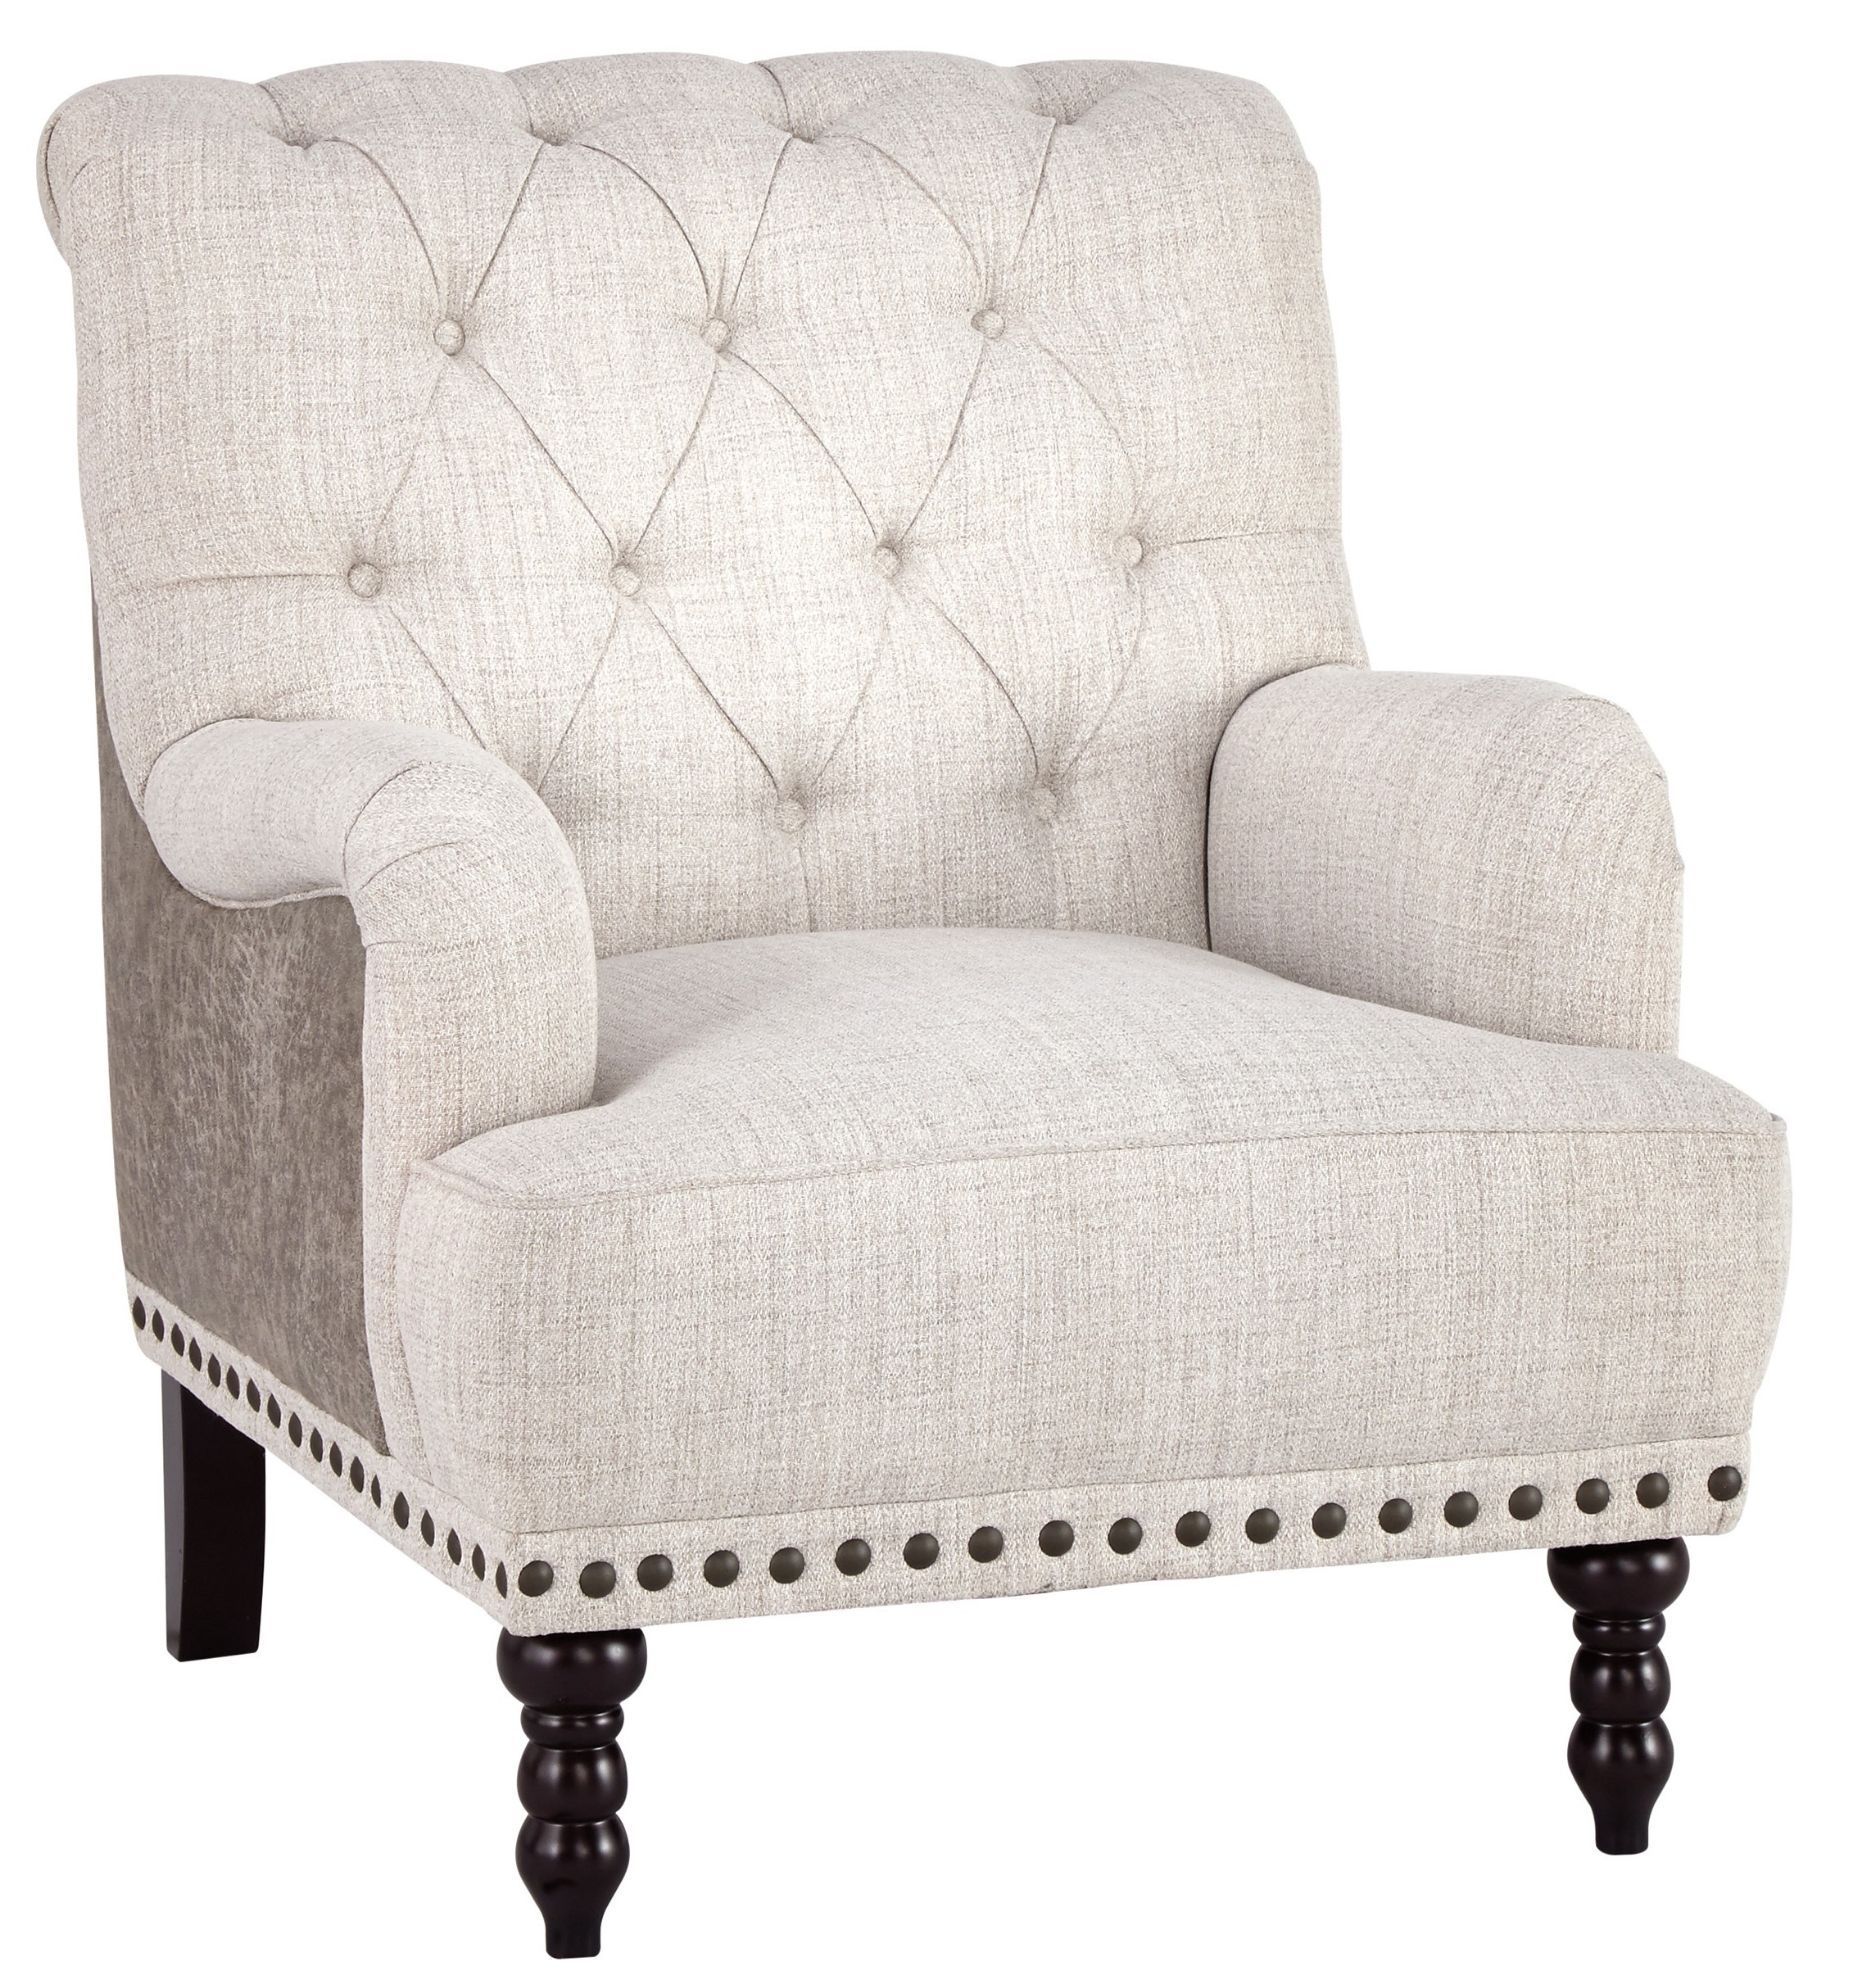 Tartonelle Ivory Accent Chair